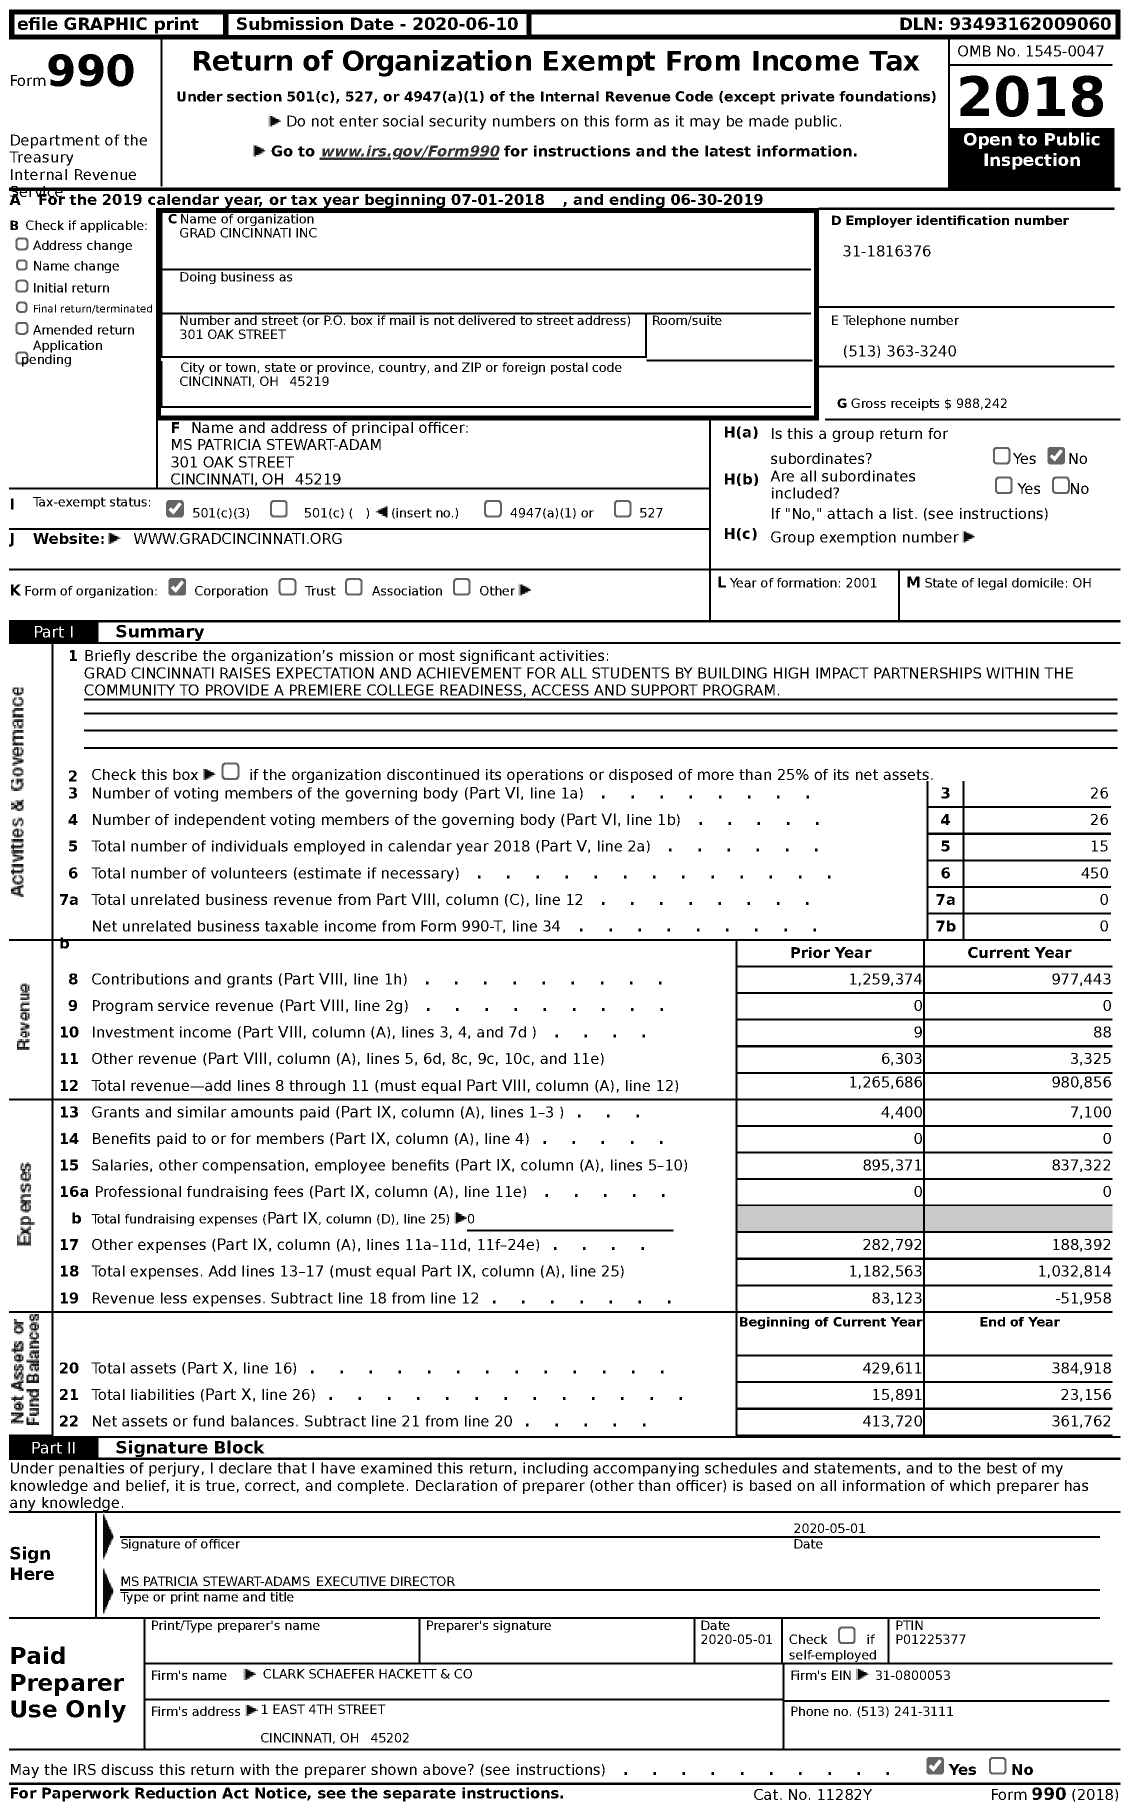 Image of first page of 2018 Form 990 for Grad Cincinnati